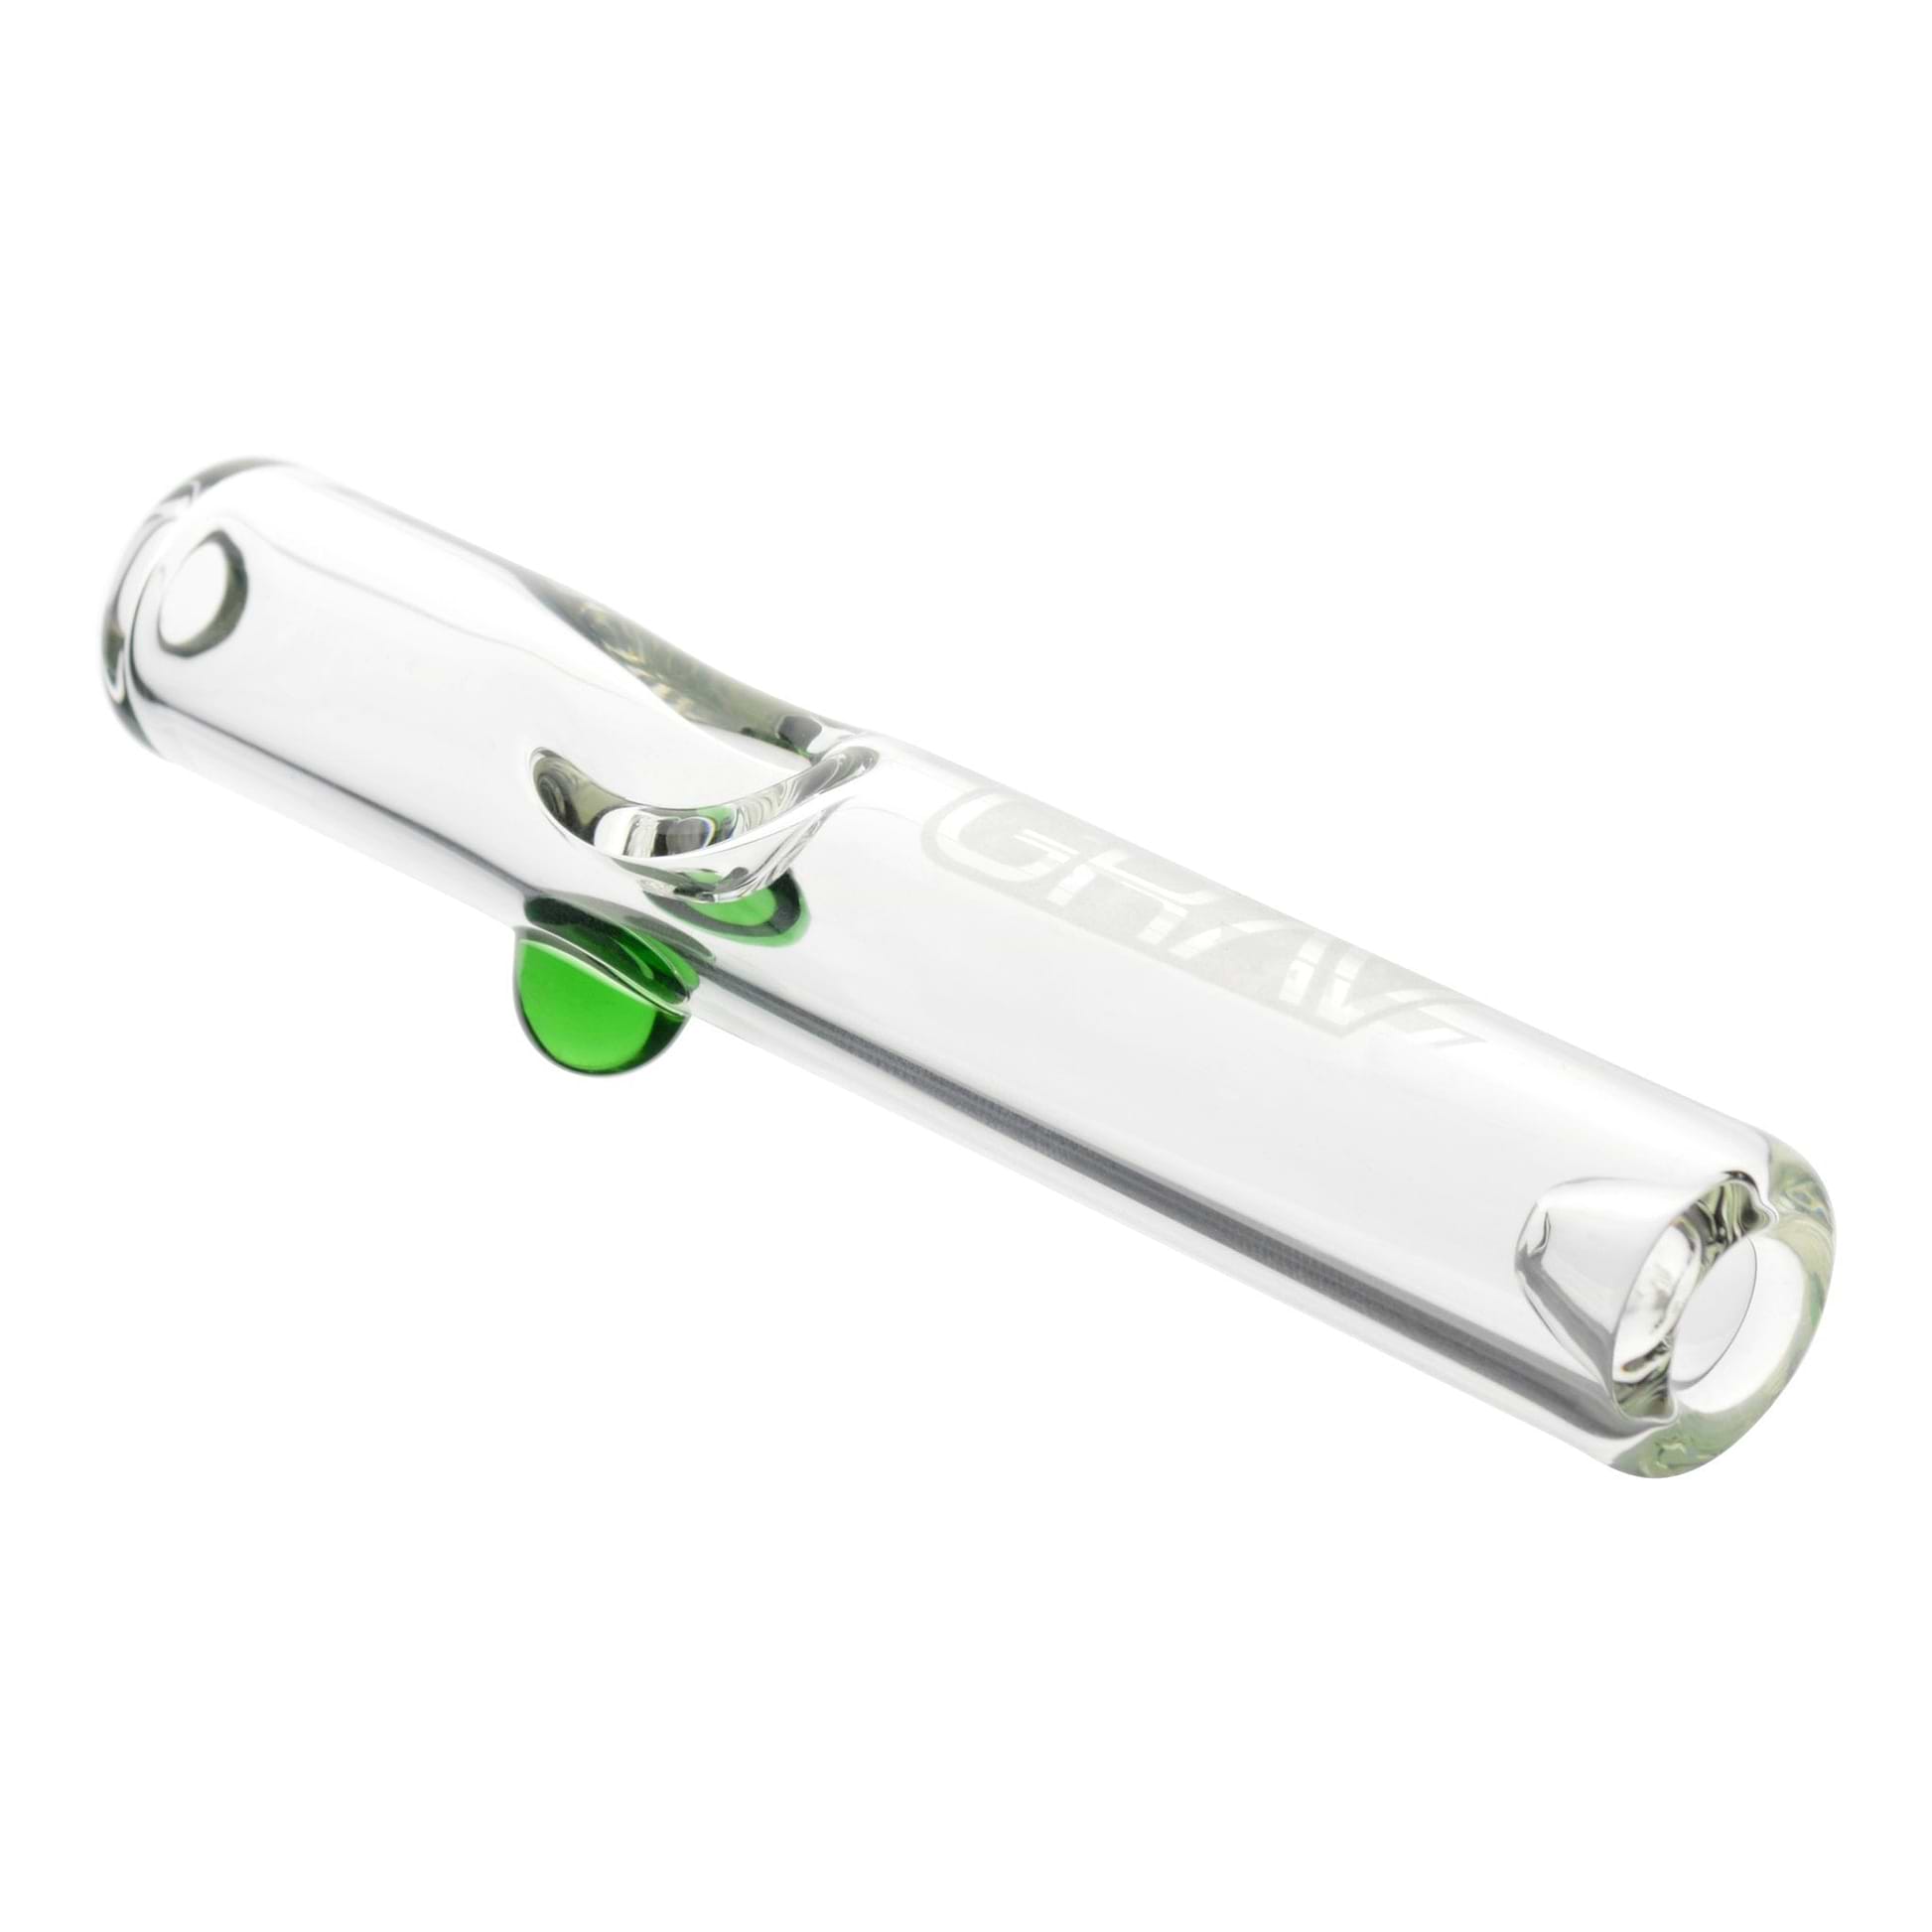 Glass GRAV steamroller smoking accessory test-tube look and design clear classic look